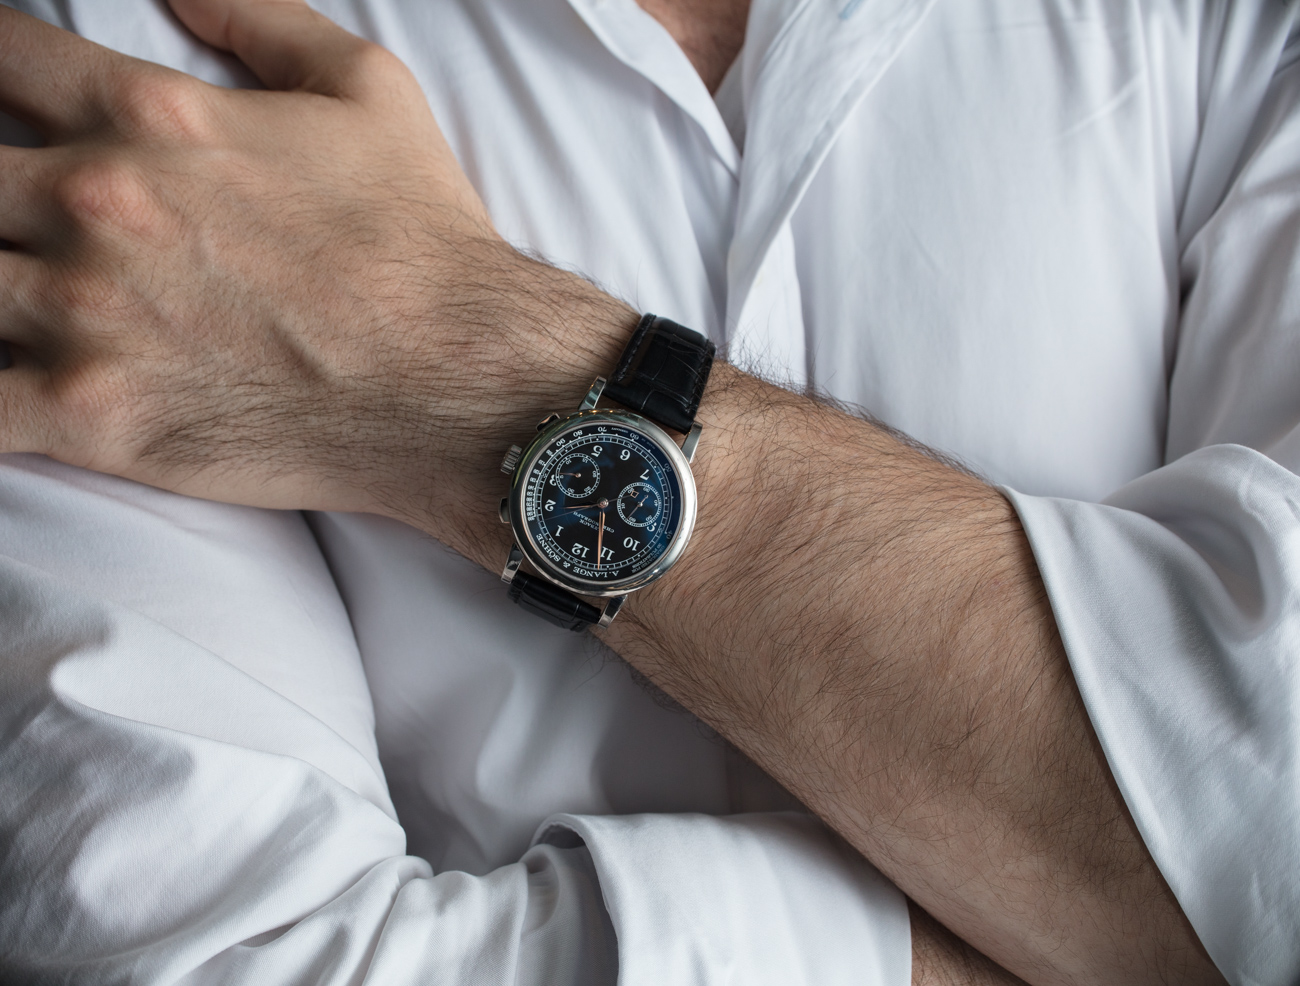 Q-CTRL Founder Explains What Teutonic Horology & Quantum Computing Have In Common